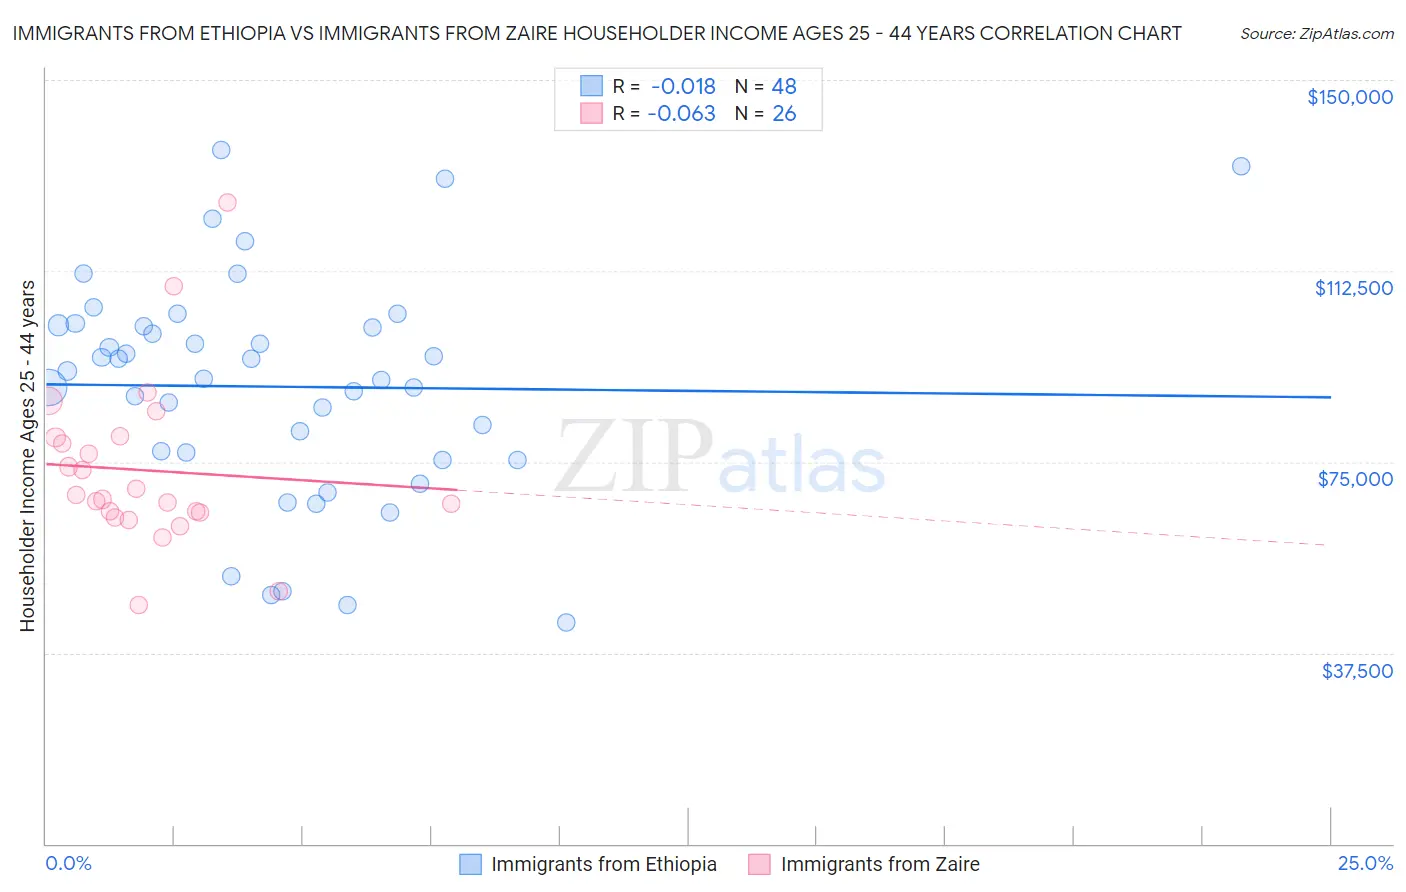 Immigrants from Ethiopia vs Immigrants from Zaire Householder Income Ages 25 - 44 years